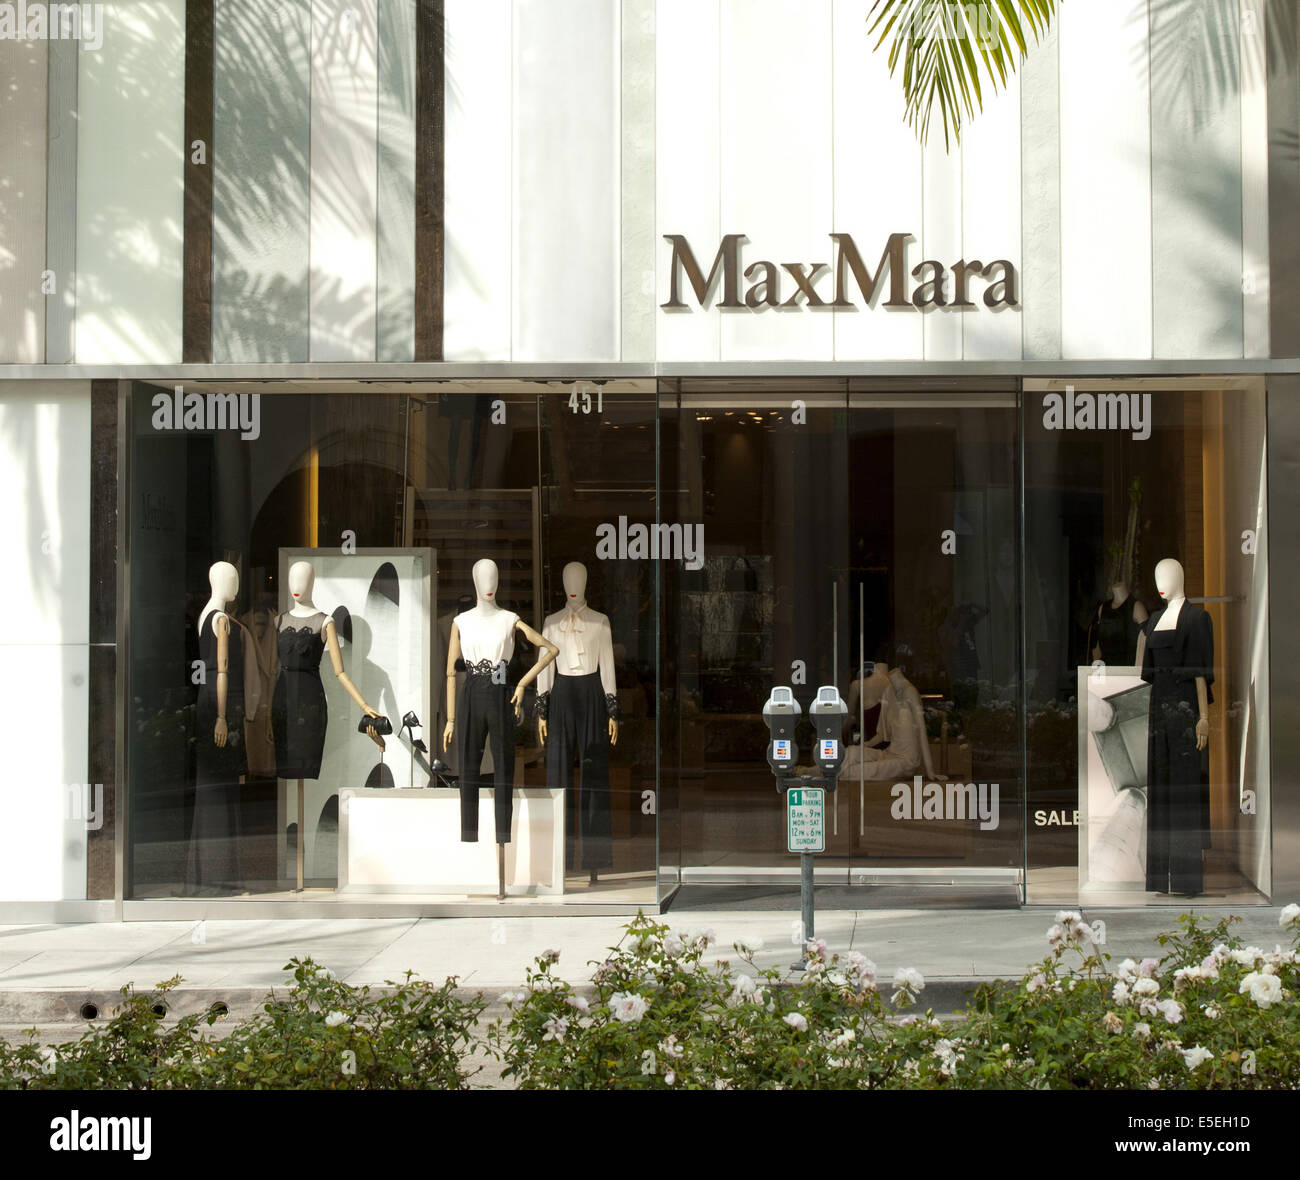 June 23, 2014 - Beverly Hills/Los Angeles, California, U.S - MaxMara on Rodeo Drive, is an Italian fashion house founded in 1951 with over 20 high quality designer collections while focusing on women's wear.---Rodeo Drive, in the heart of Beverly Hills, is a two-way, two mile long, north south city street with a mix of small to large luxury homes, city parks and green areas as well as world class high end signature flagship stores and shops with globally known luxury goods at it's south end.---Beverly Hills, ranch land originally known as Rancho Rodeo de las Aguas, was subdivided into lots for Stock Photo